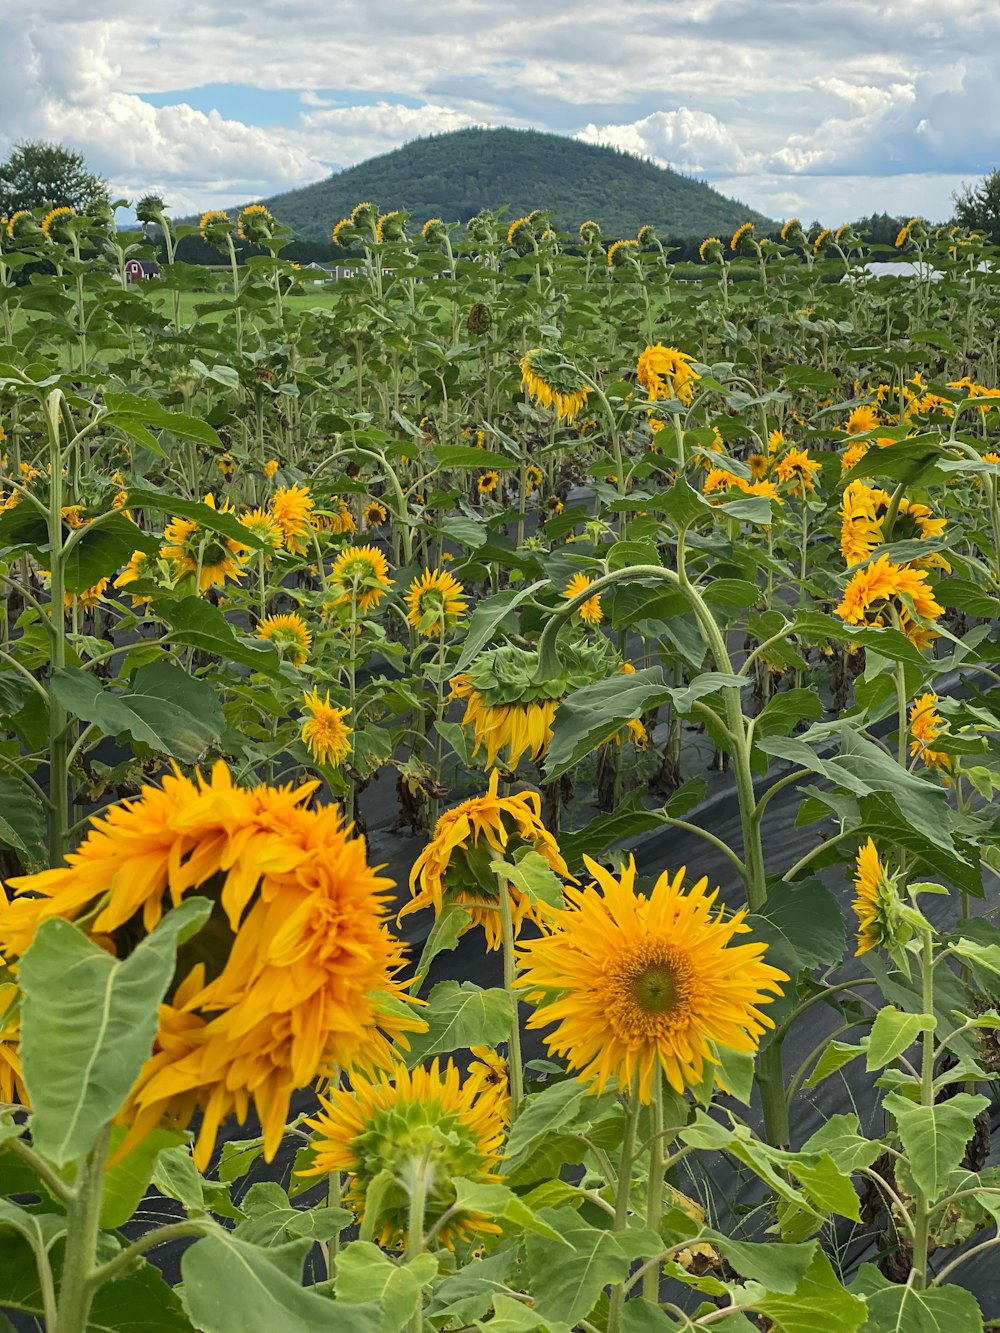 a large field of sunflowers with a mountain in the background